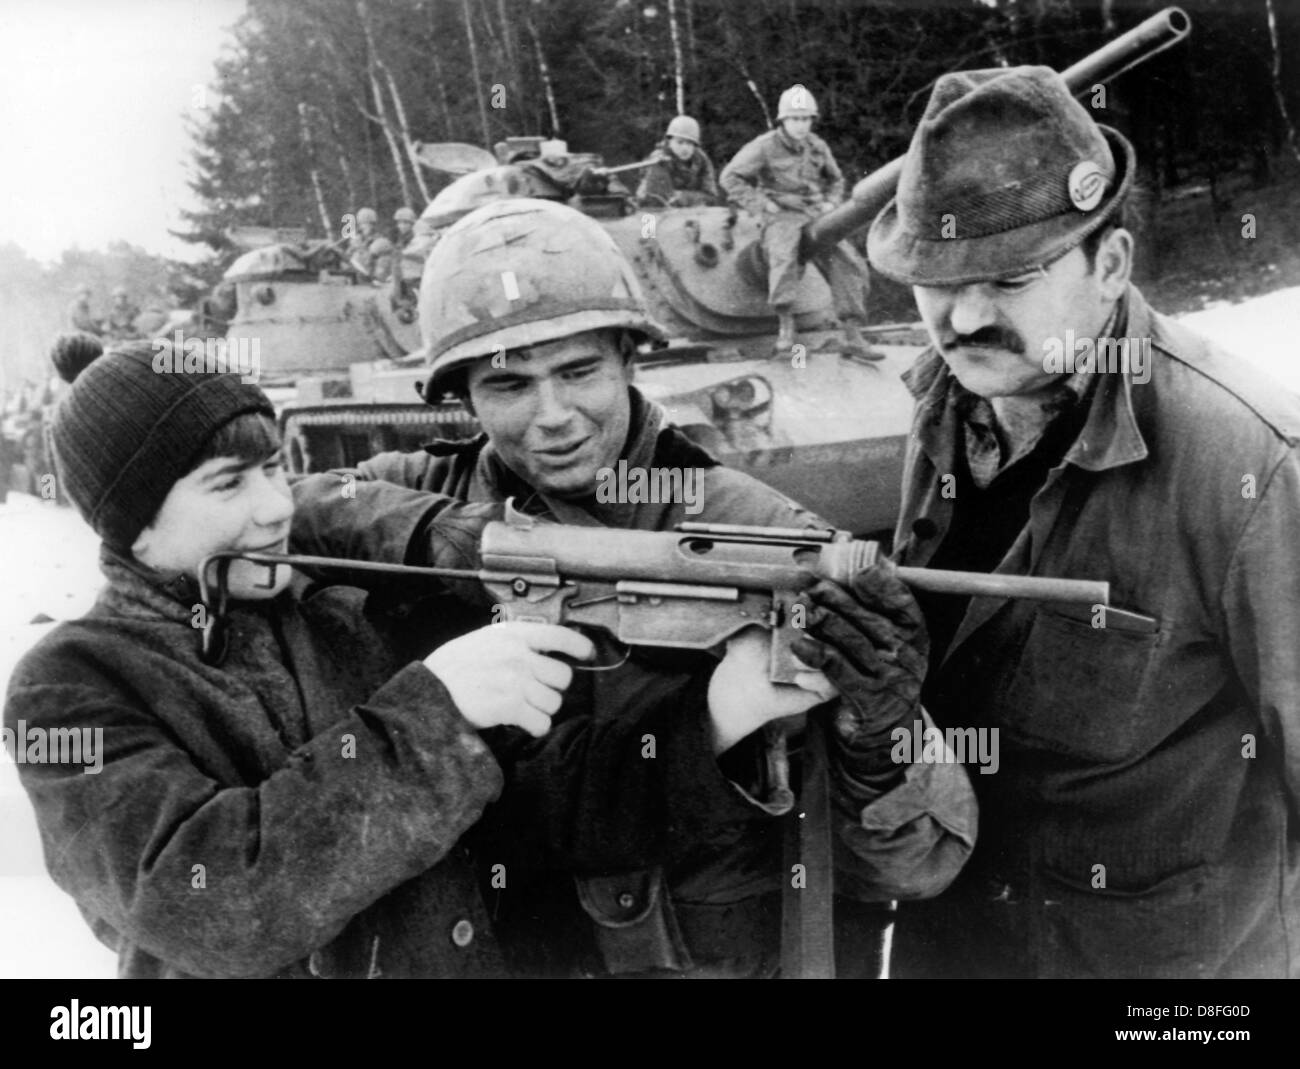 A soldier of the US army (centre), which was in Germany for the participation in the manoeuvre REFORGER I, shows to the twelve-year-old Franzl (left) and his father (right) how to handle a new submachine gun. Altogether around 17.000 soldiers participated in the manoeuvre, many of them were brought from the USA to Germany via air bridge. Stock Photo